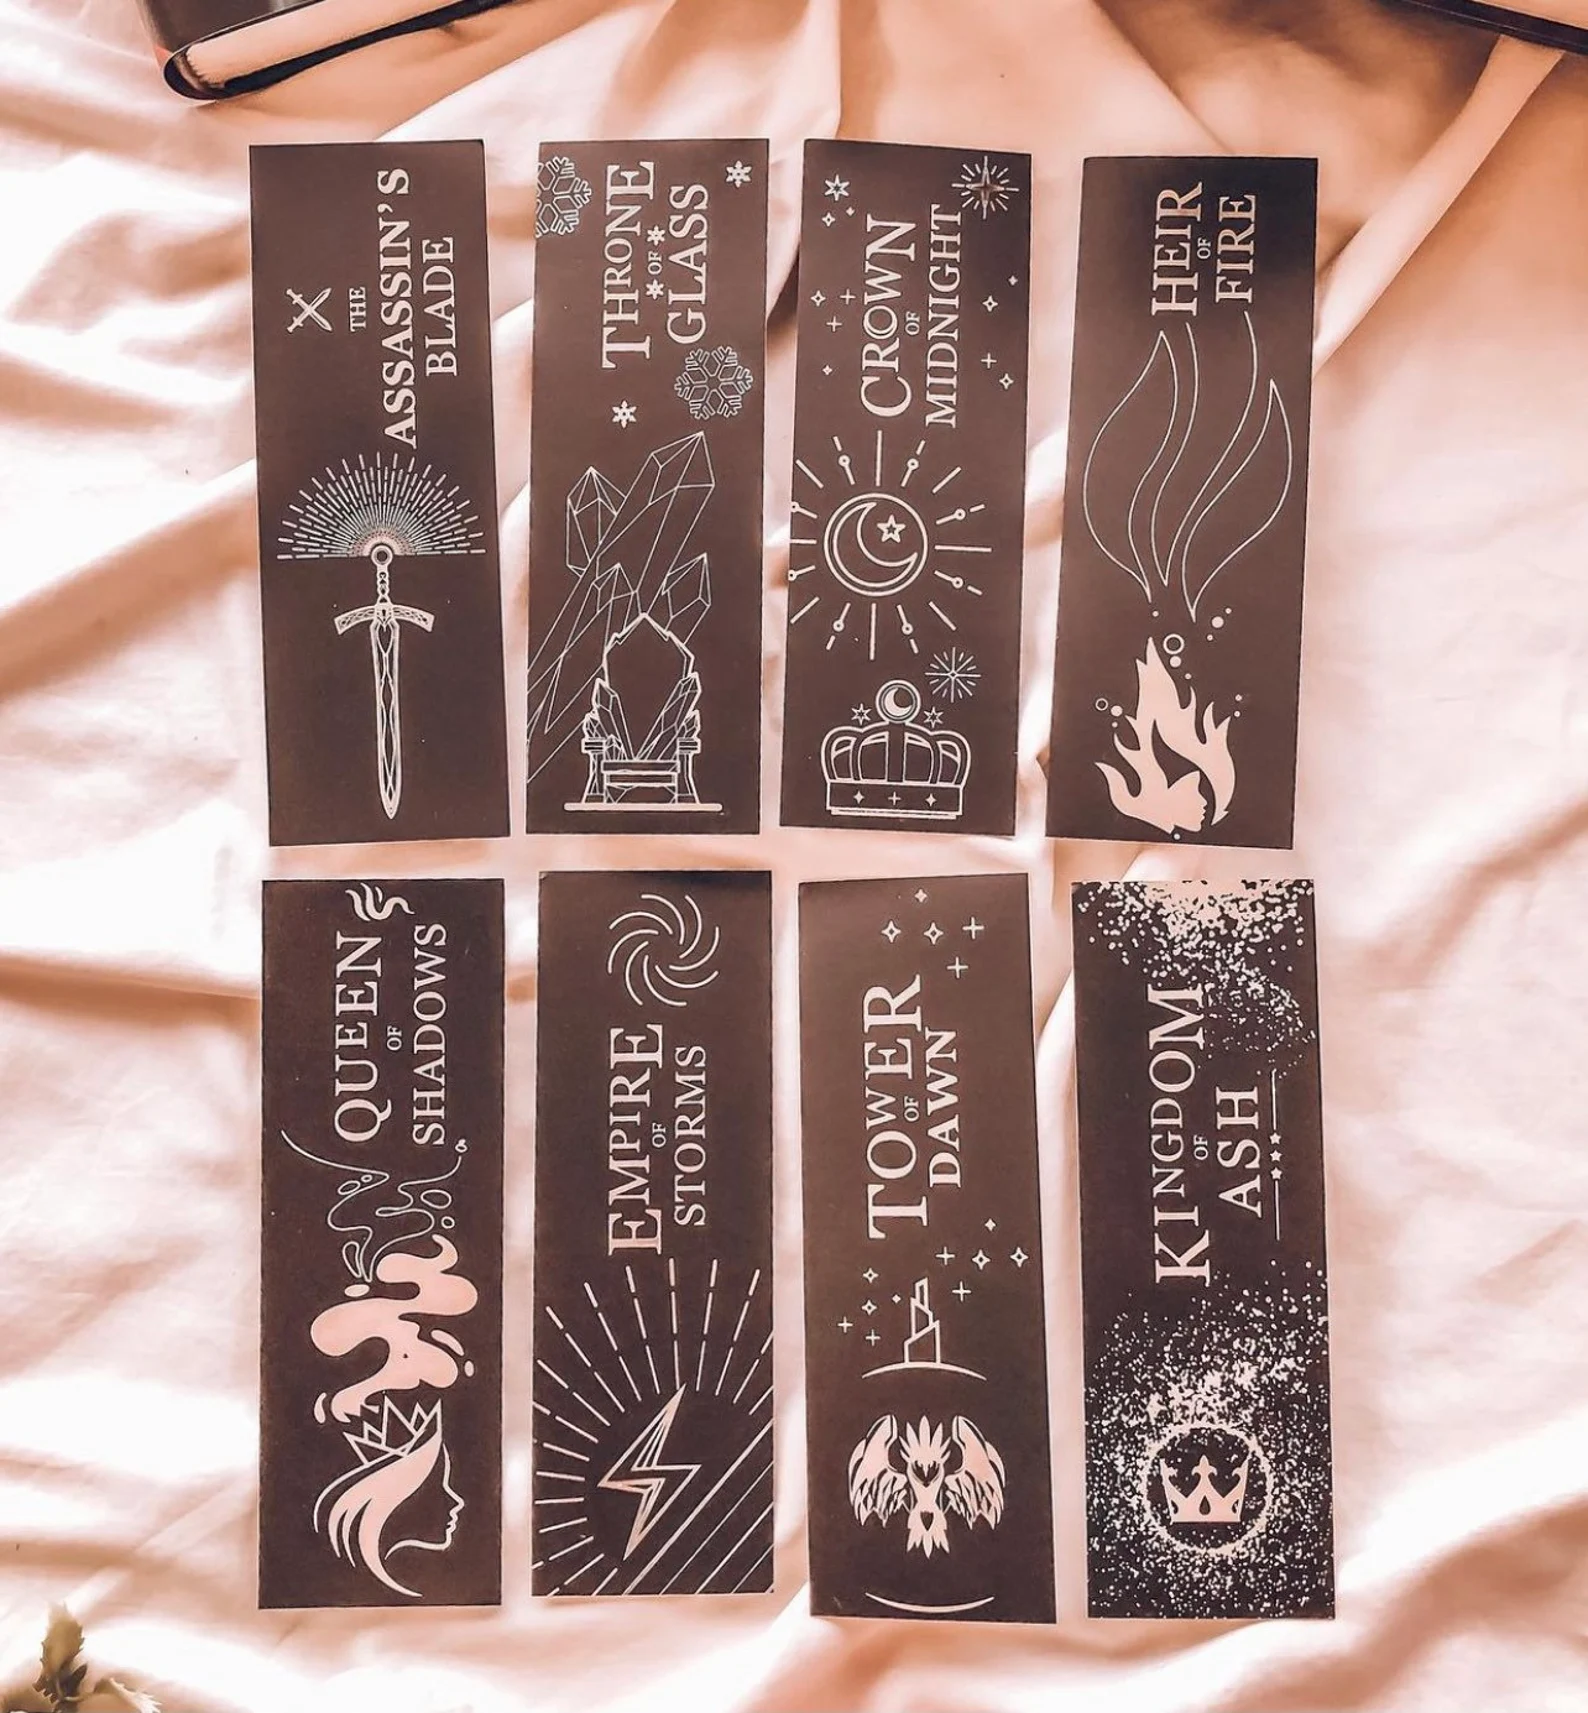 A photo of 8 black bookmarks. Top to bottom, left to right, the bookmarks read The Assasin’s Blade, Throne of Glass, Crown of Midnight, Heir of Fire, Queen of Shadows, Empire of Storms, Tower of Dawn, and Kingdom of Ash.